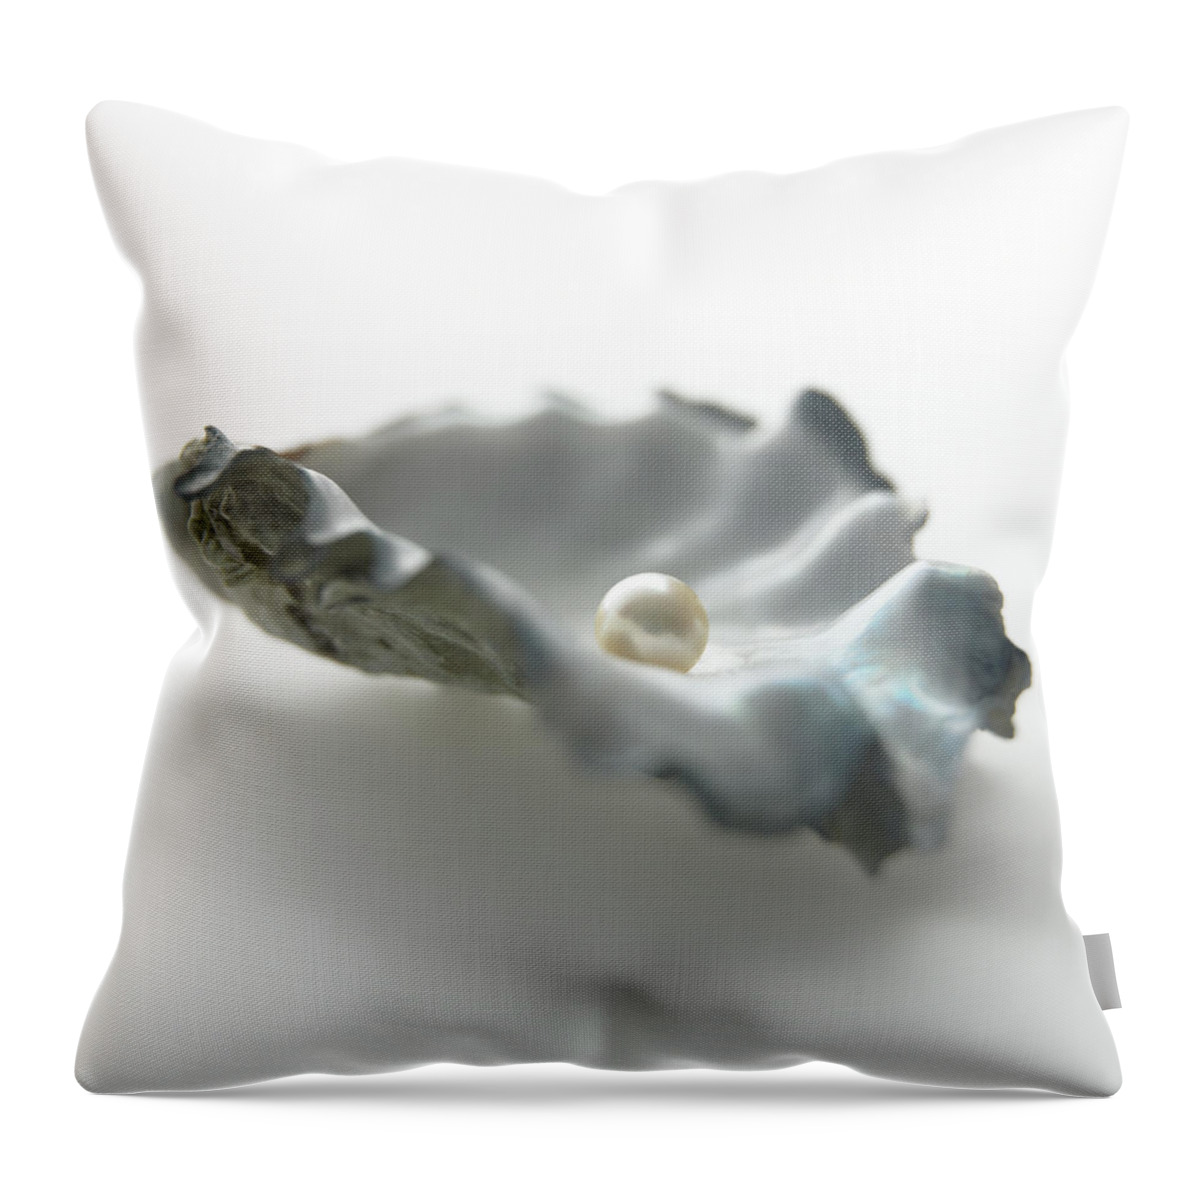 White Background Throw Pillow featuring the photograph Pearl In Oyster Shell by Biwa Studio